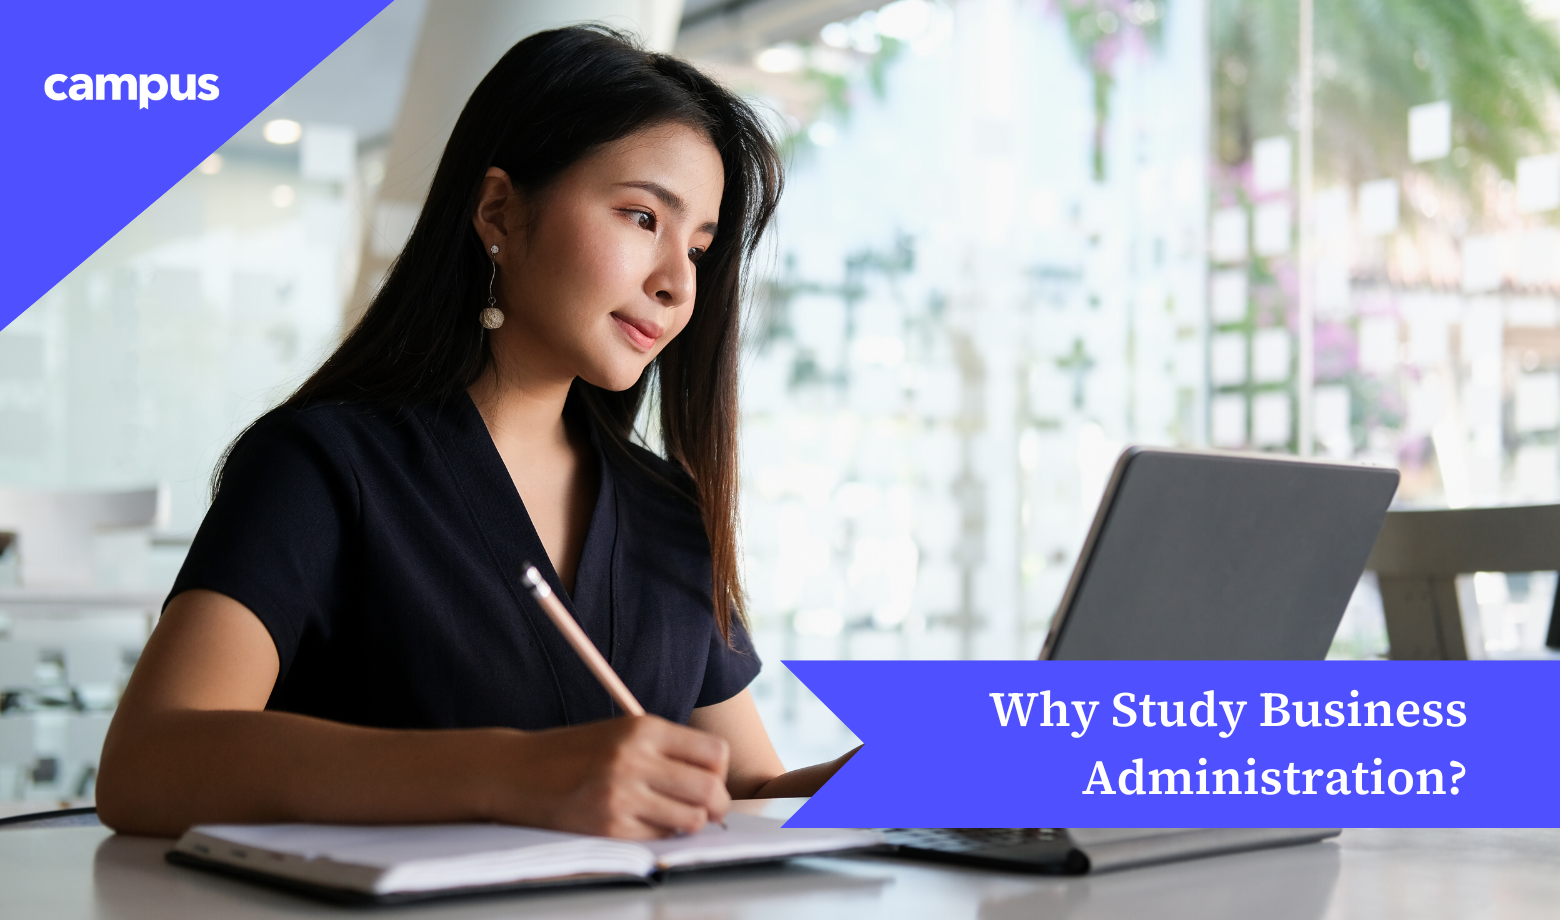 Why Study Business Administration?